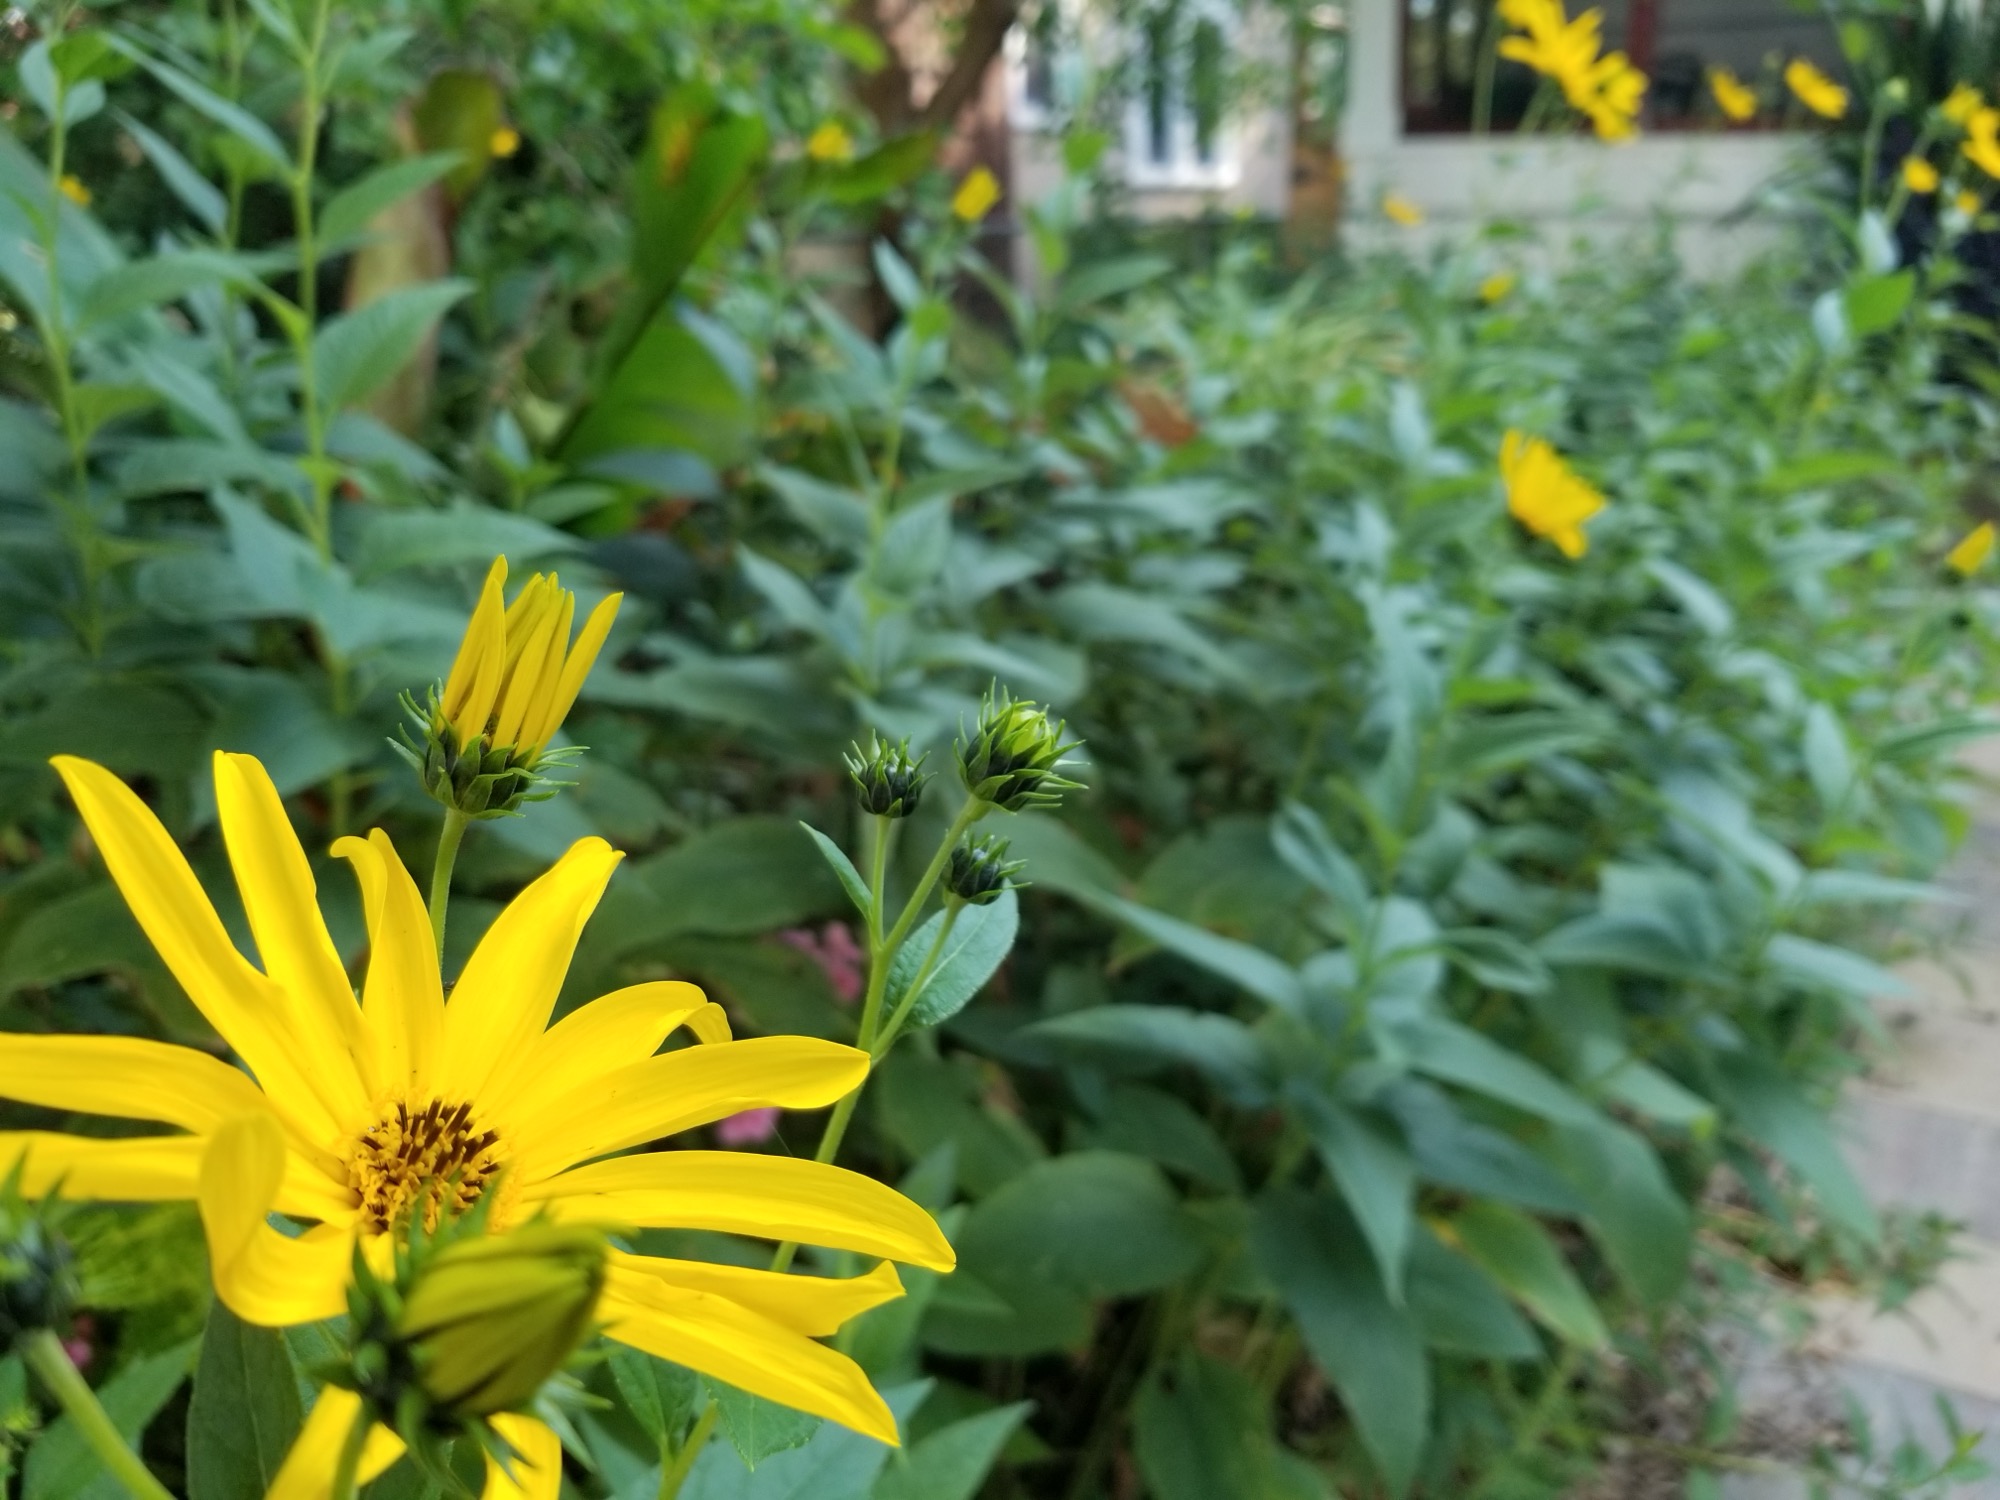 Yellow flowers blooming near a home's sidewalk path